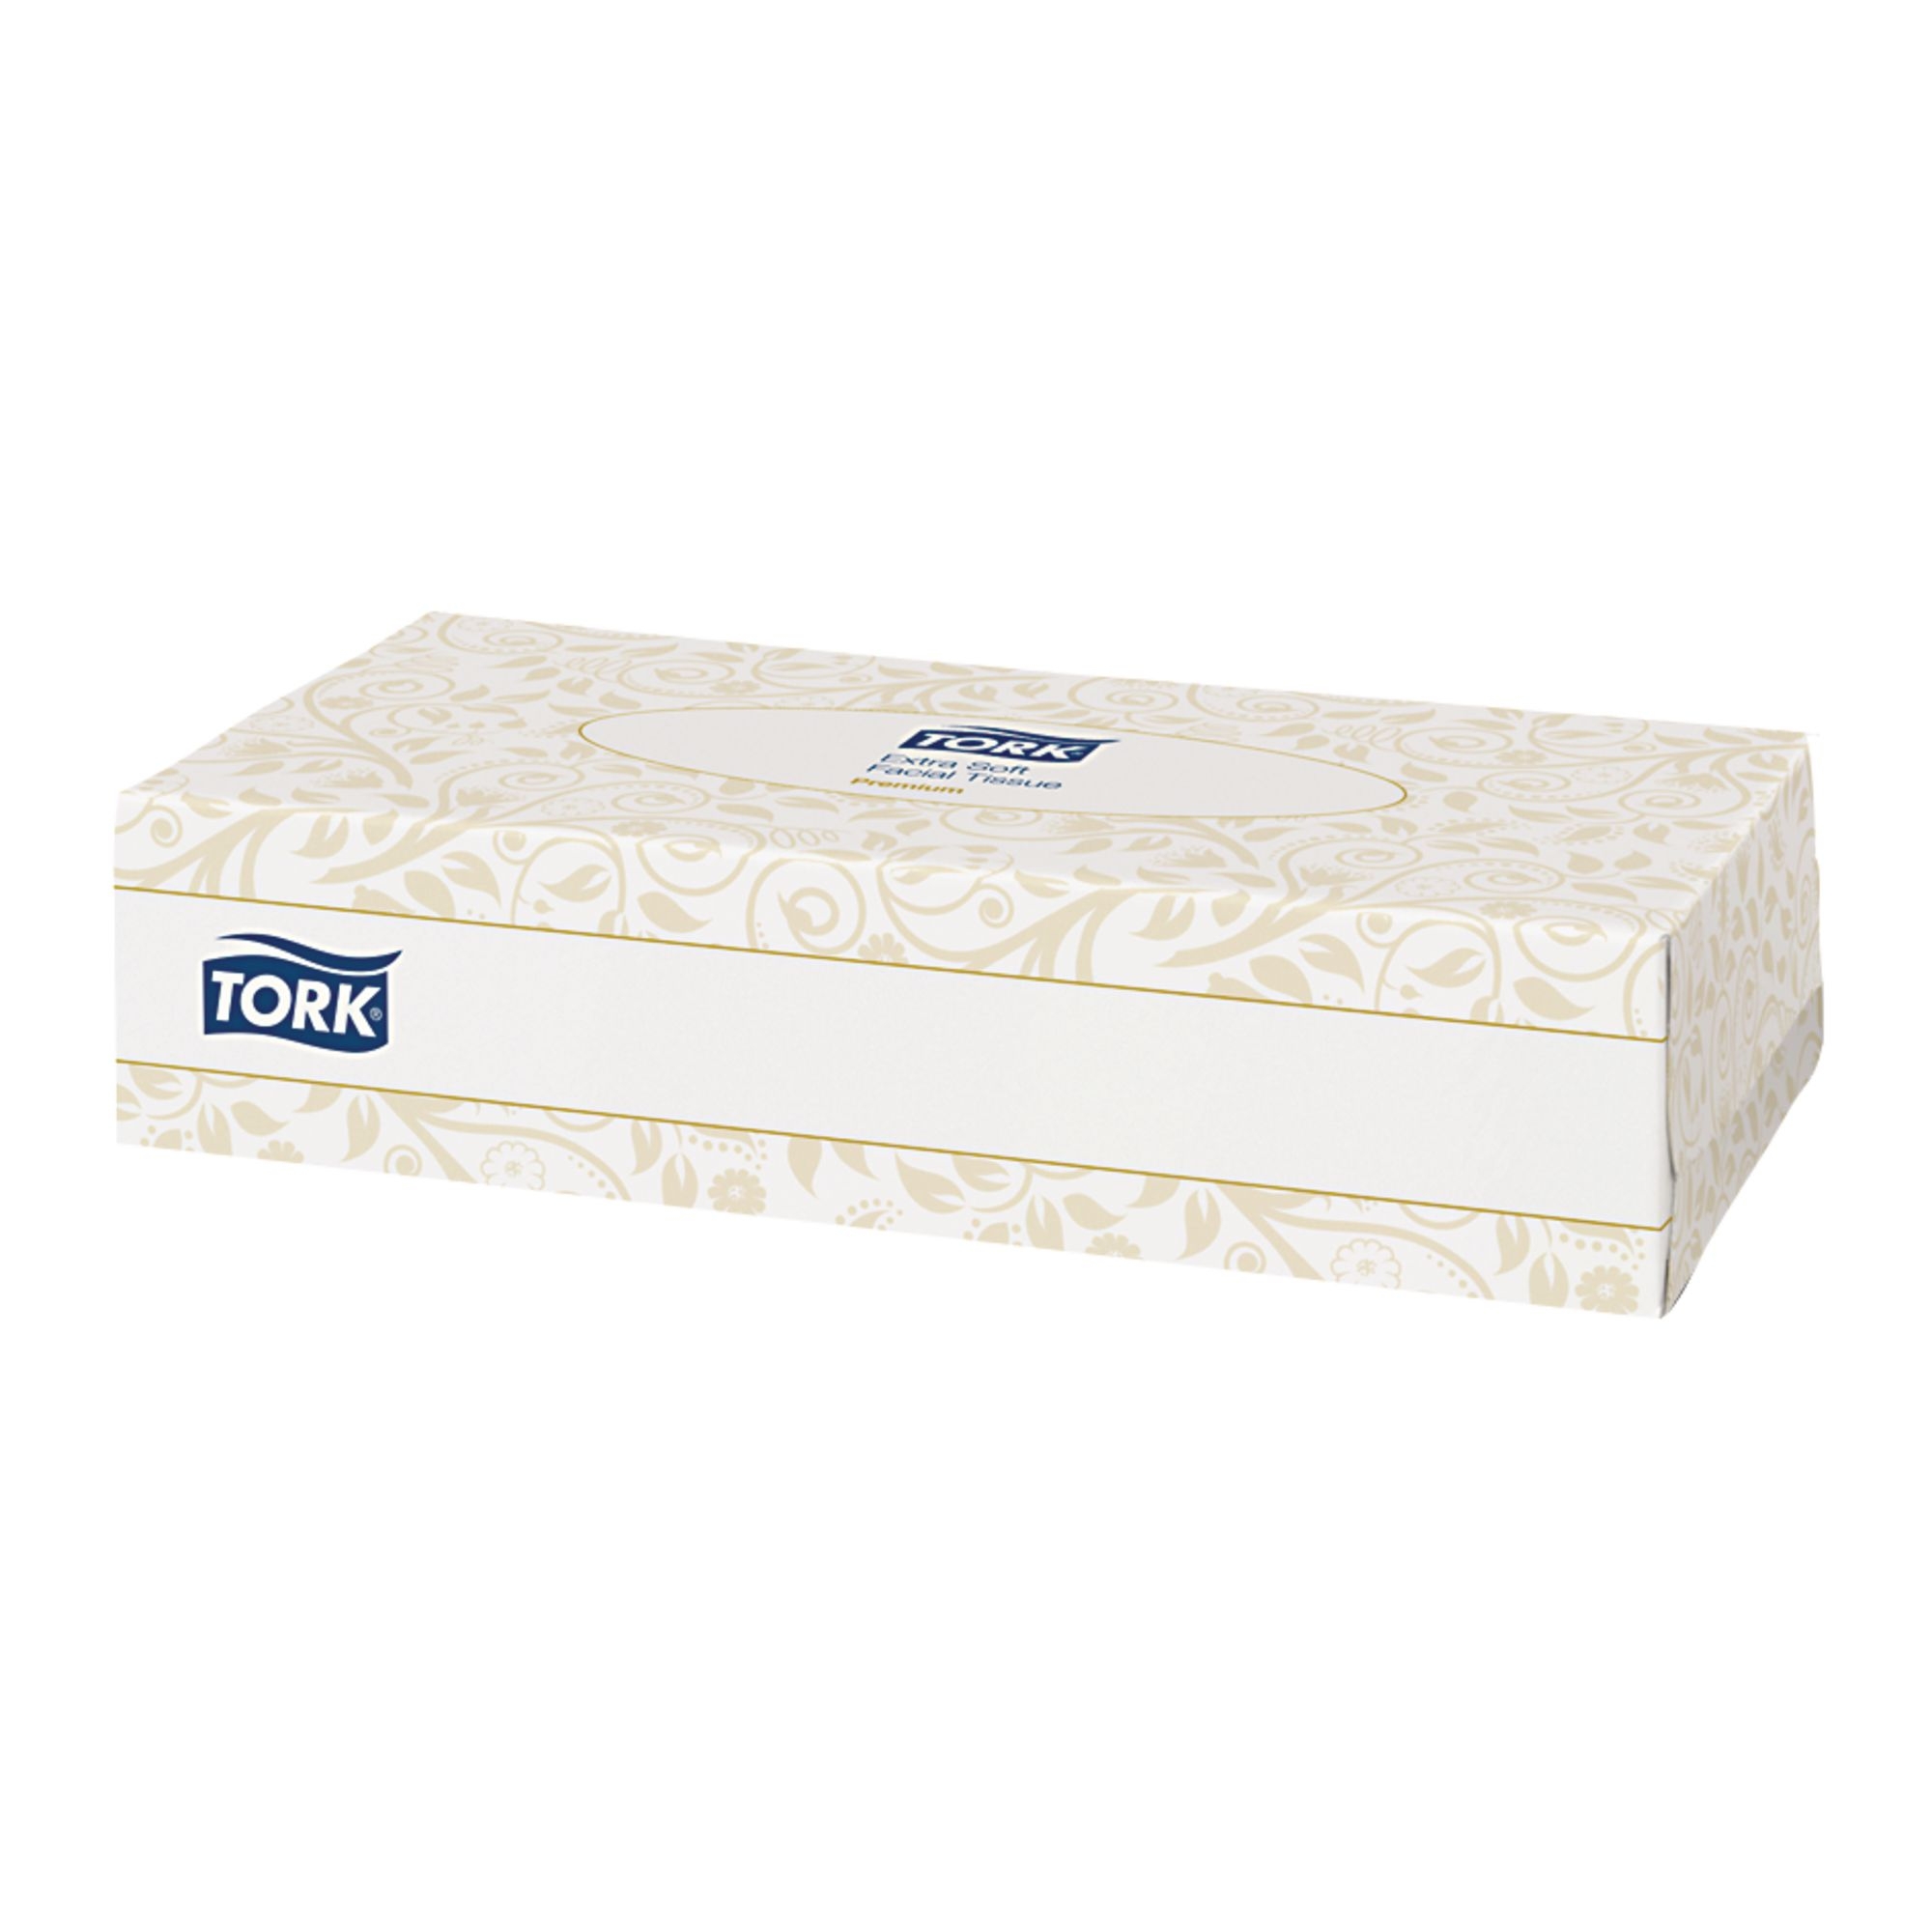 Tork Extra Soft Facial Tissues 14 02 80 (Pack of 24)